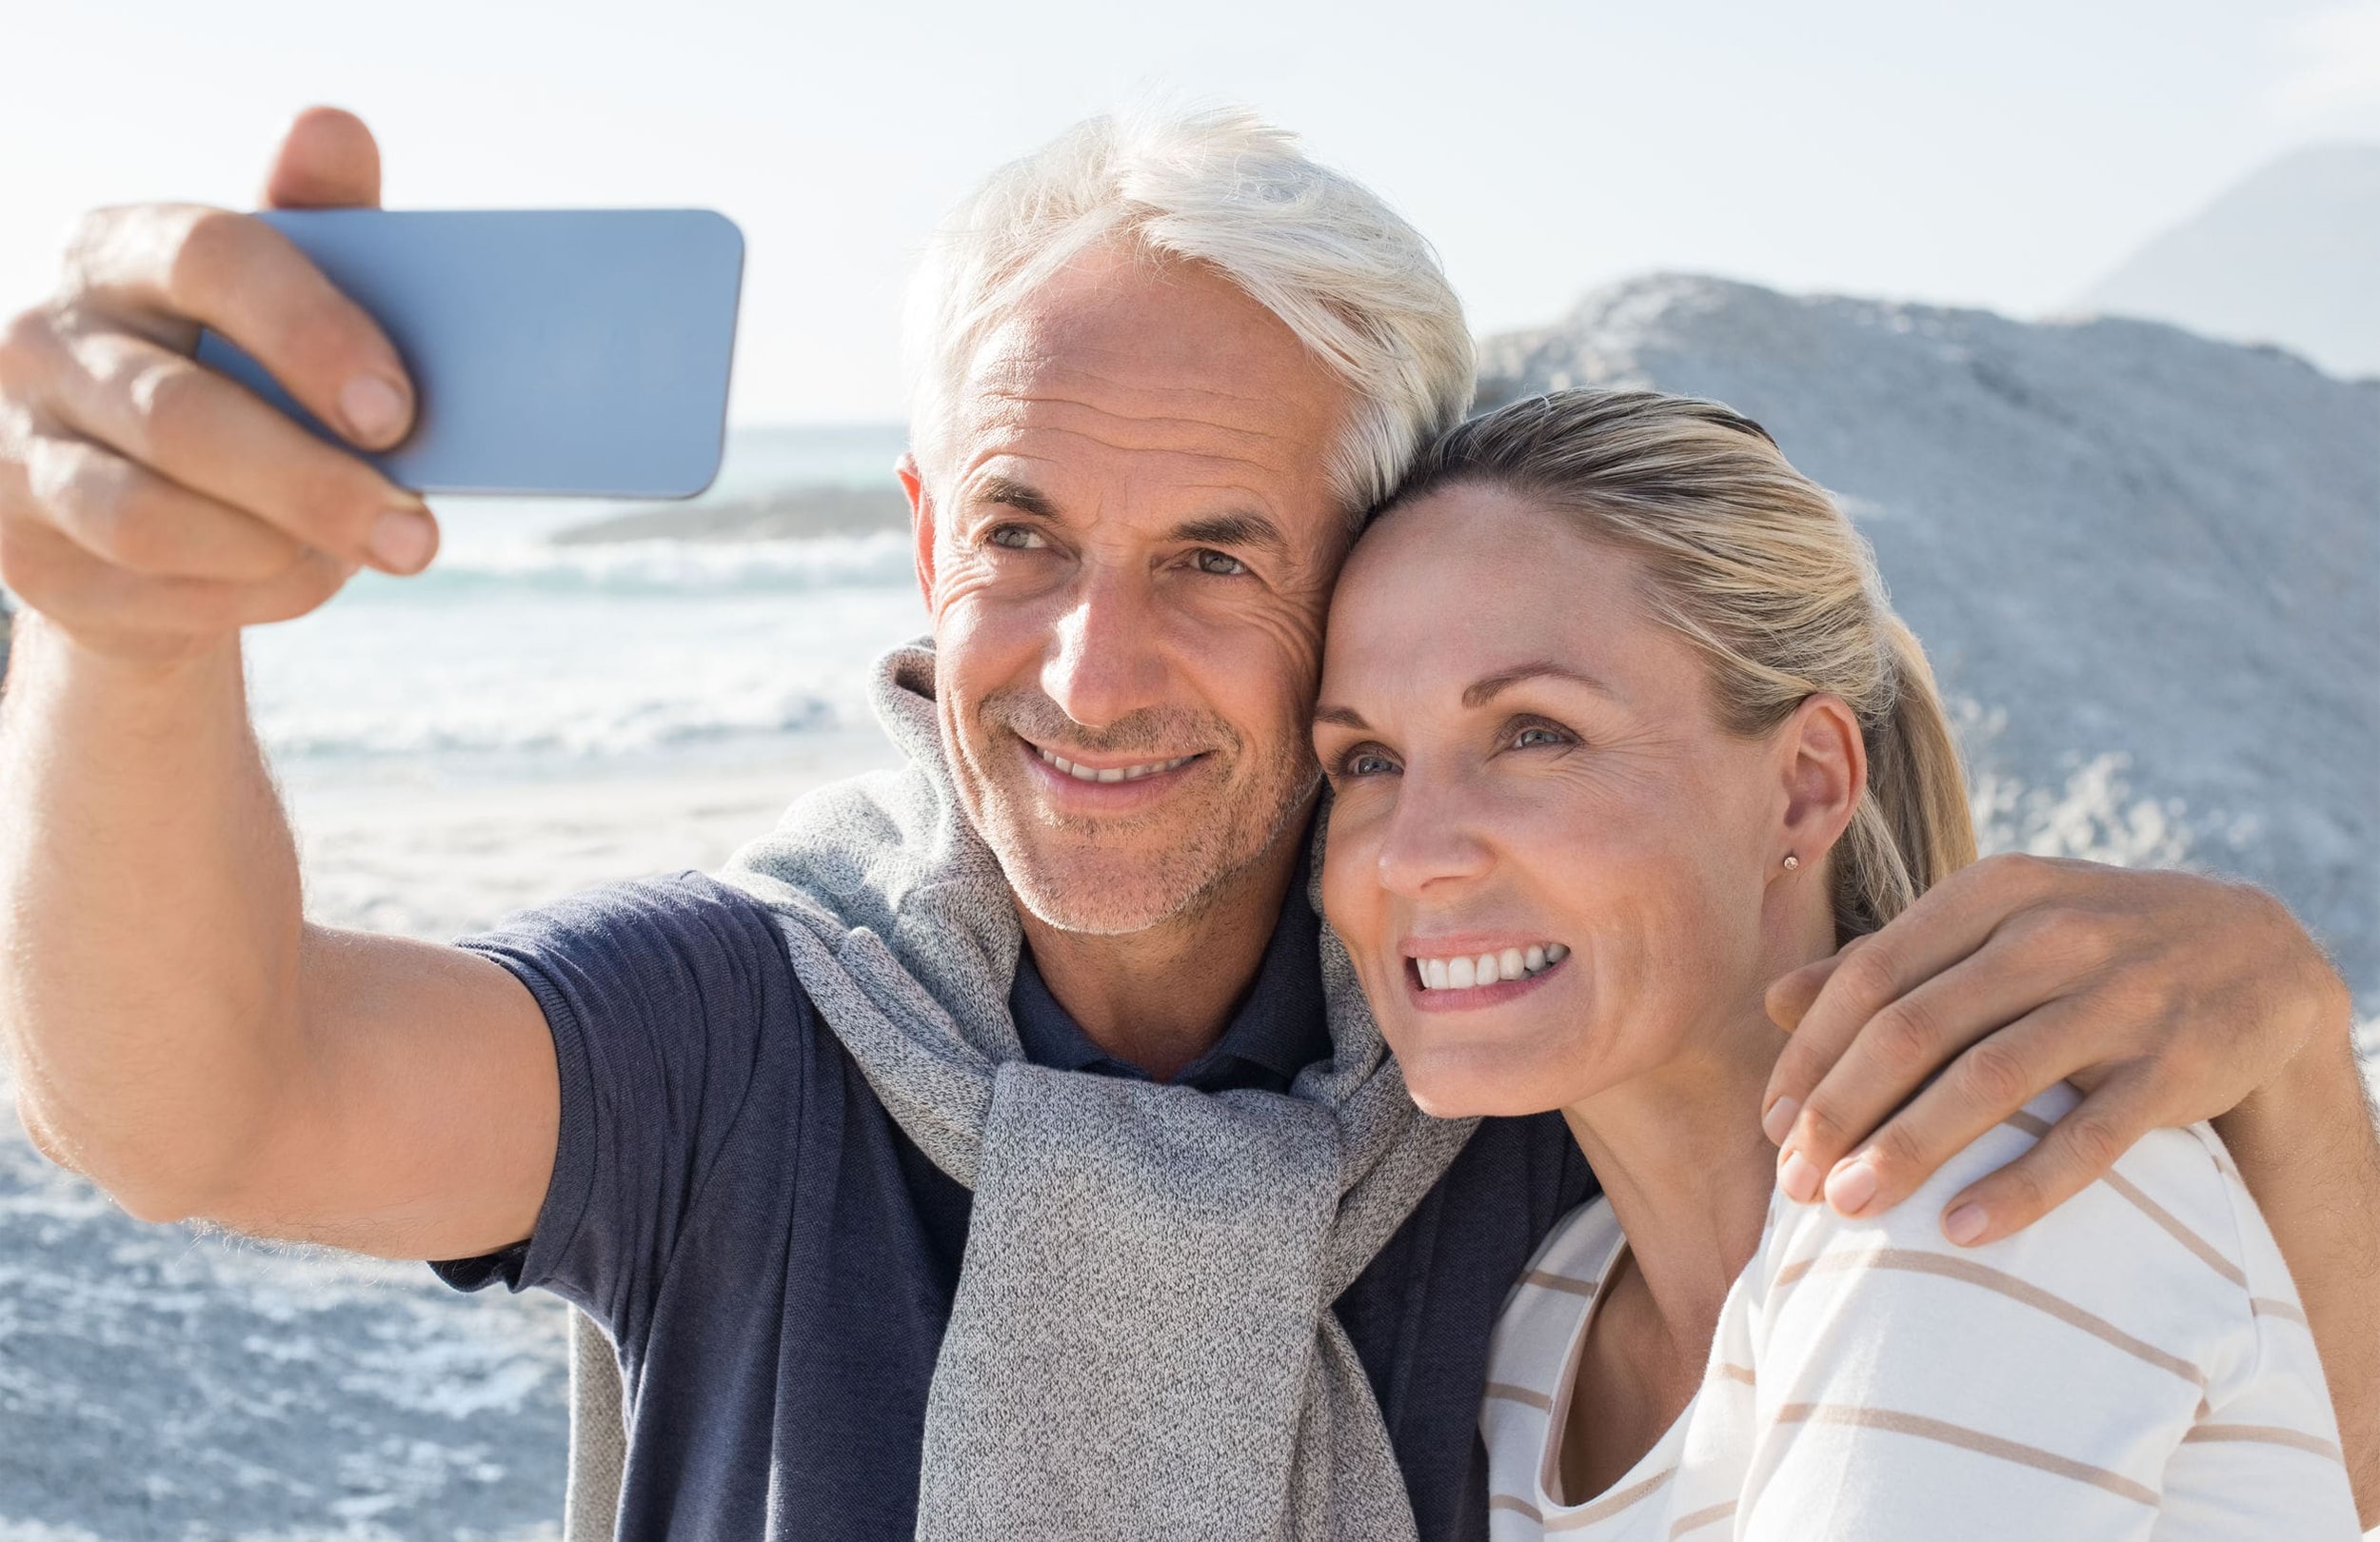 Mature couple taking a selfie while on vacation.